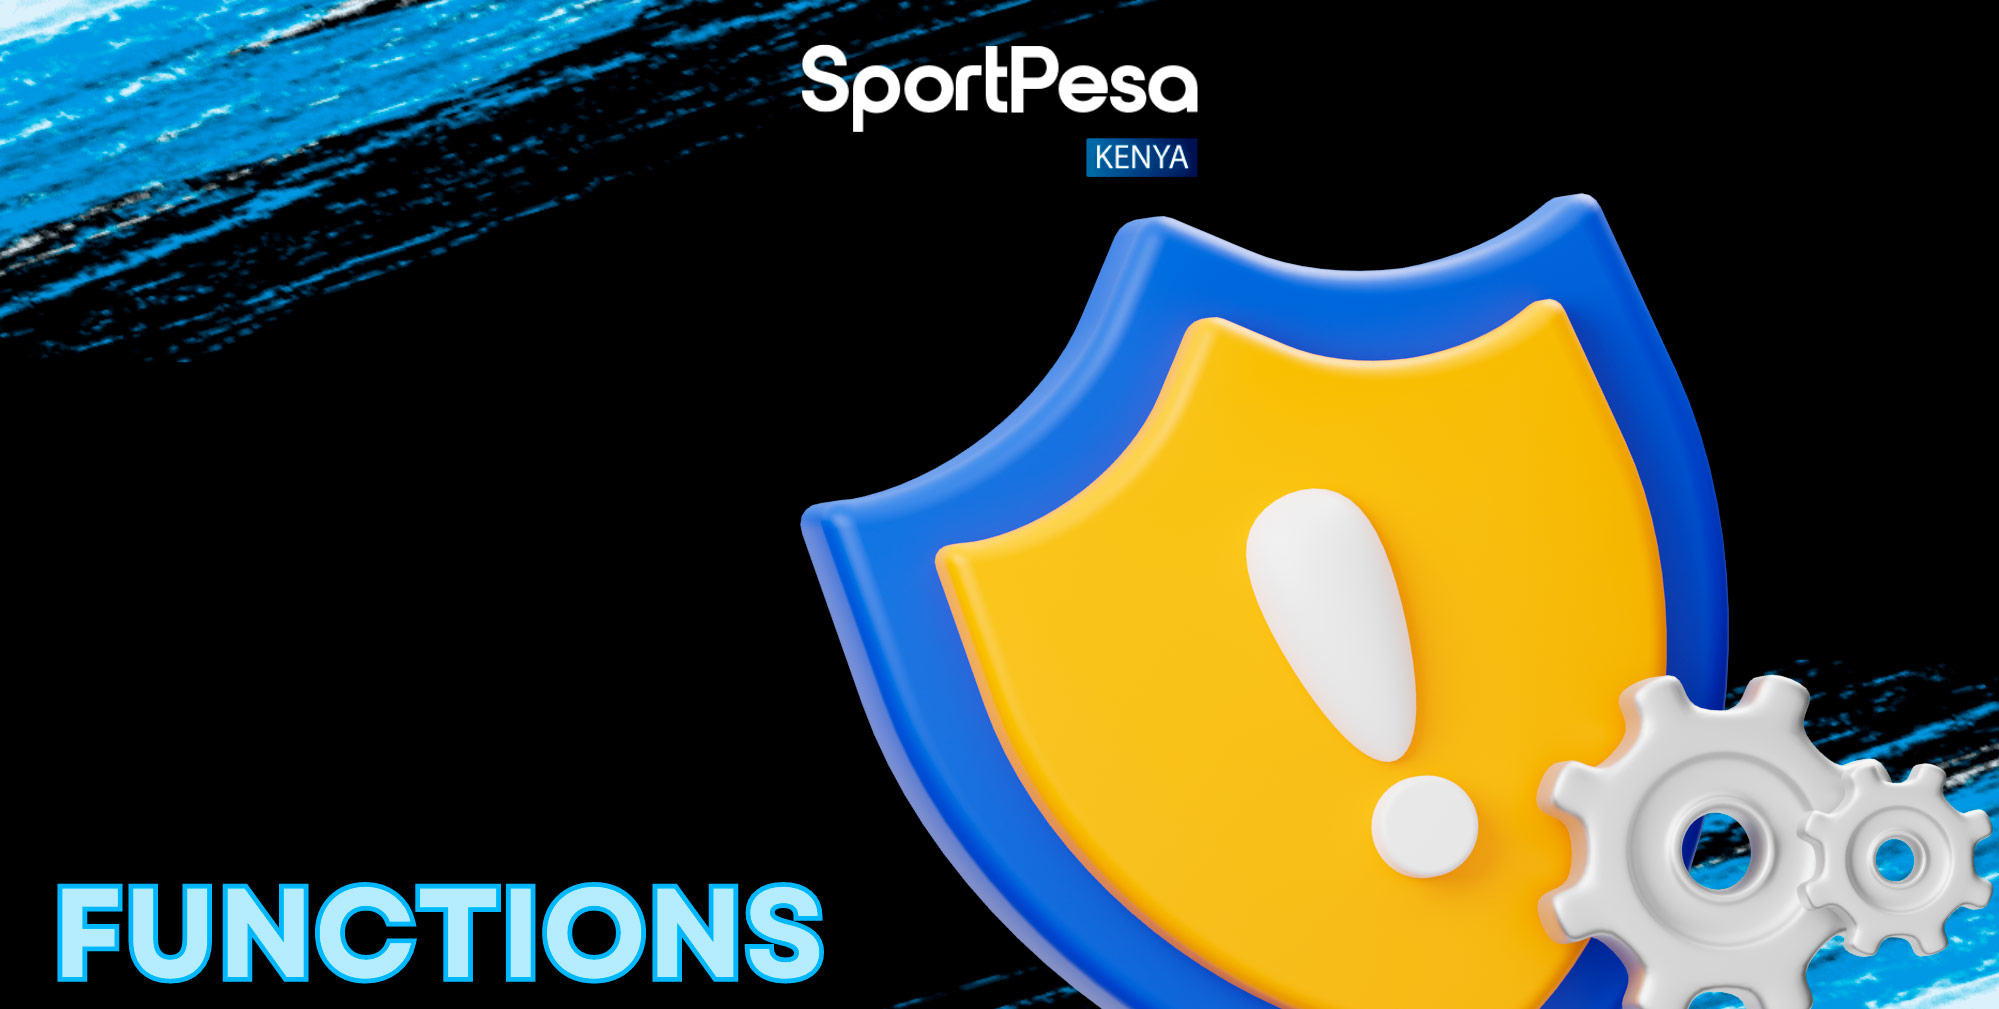 The Sportpesa mobile application has its own functions